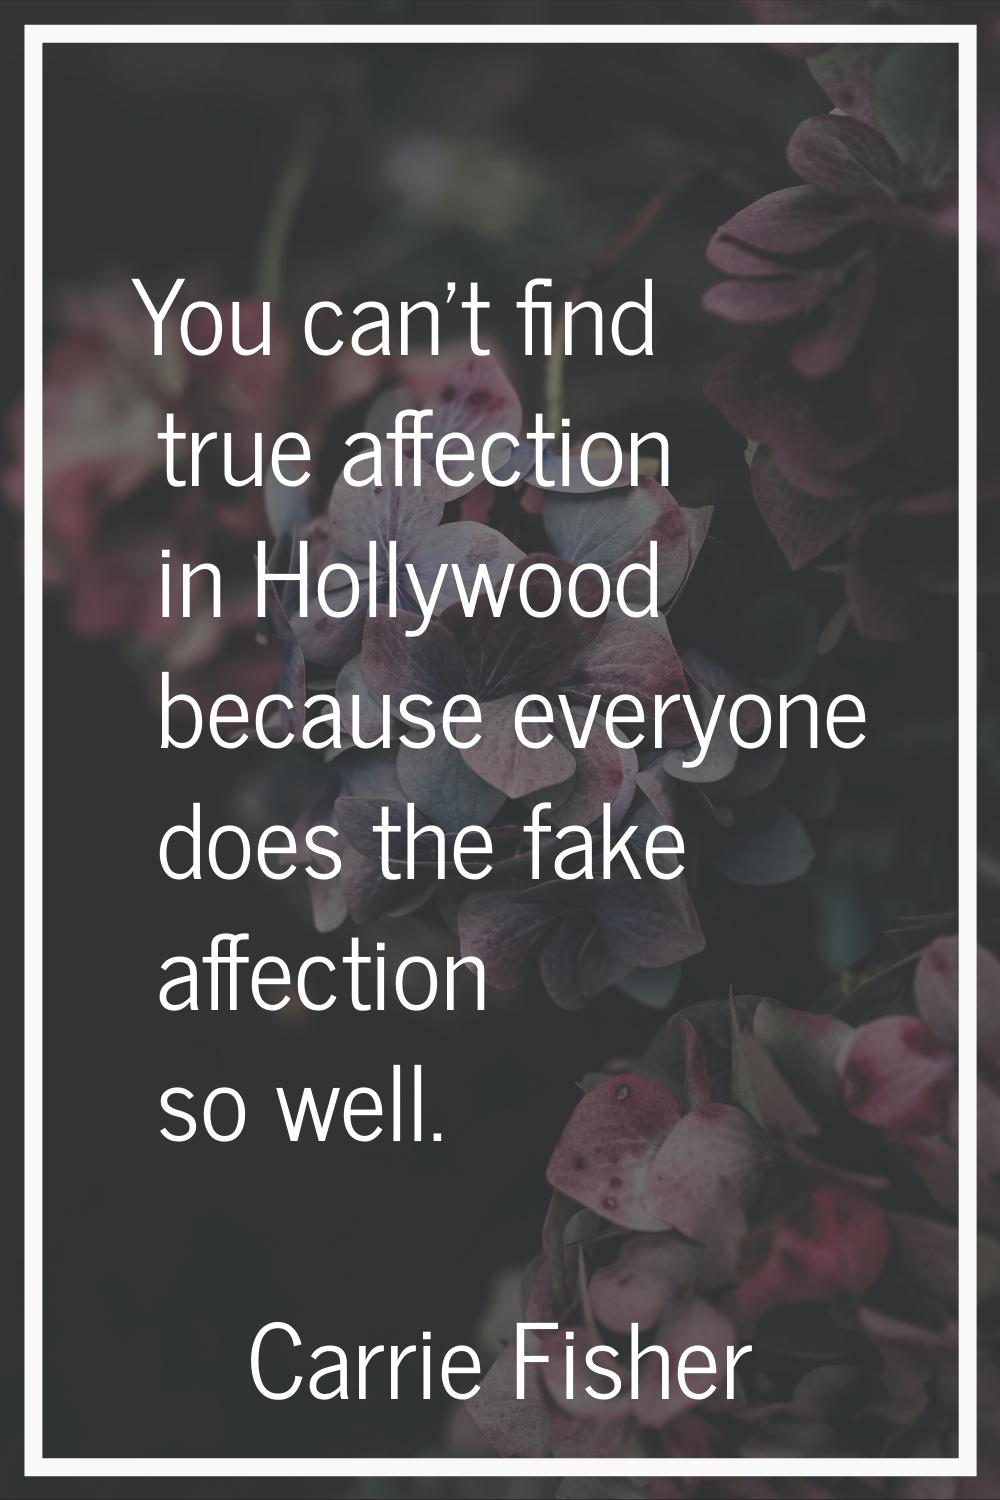 You can't find true affection in Hollywood because everyone does the fake affection so well.